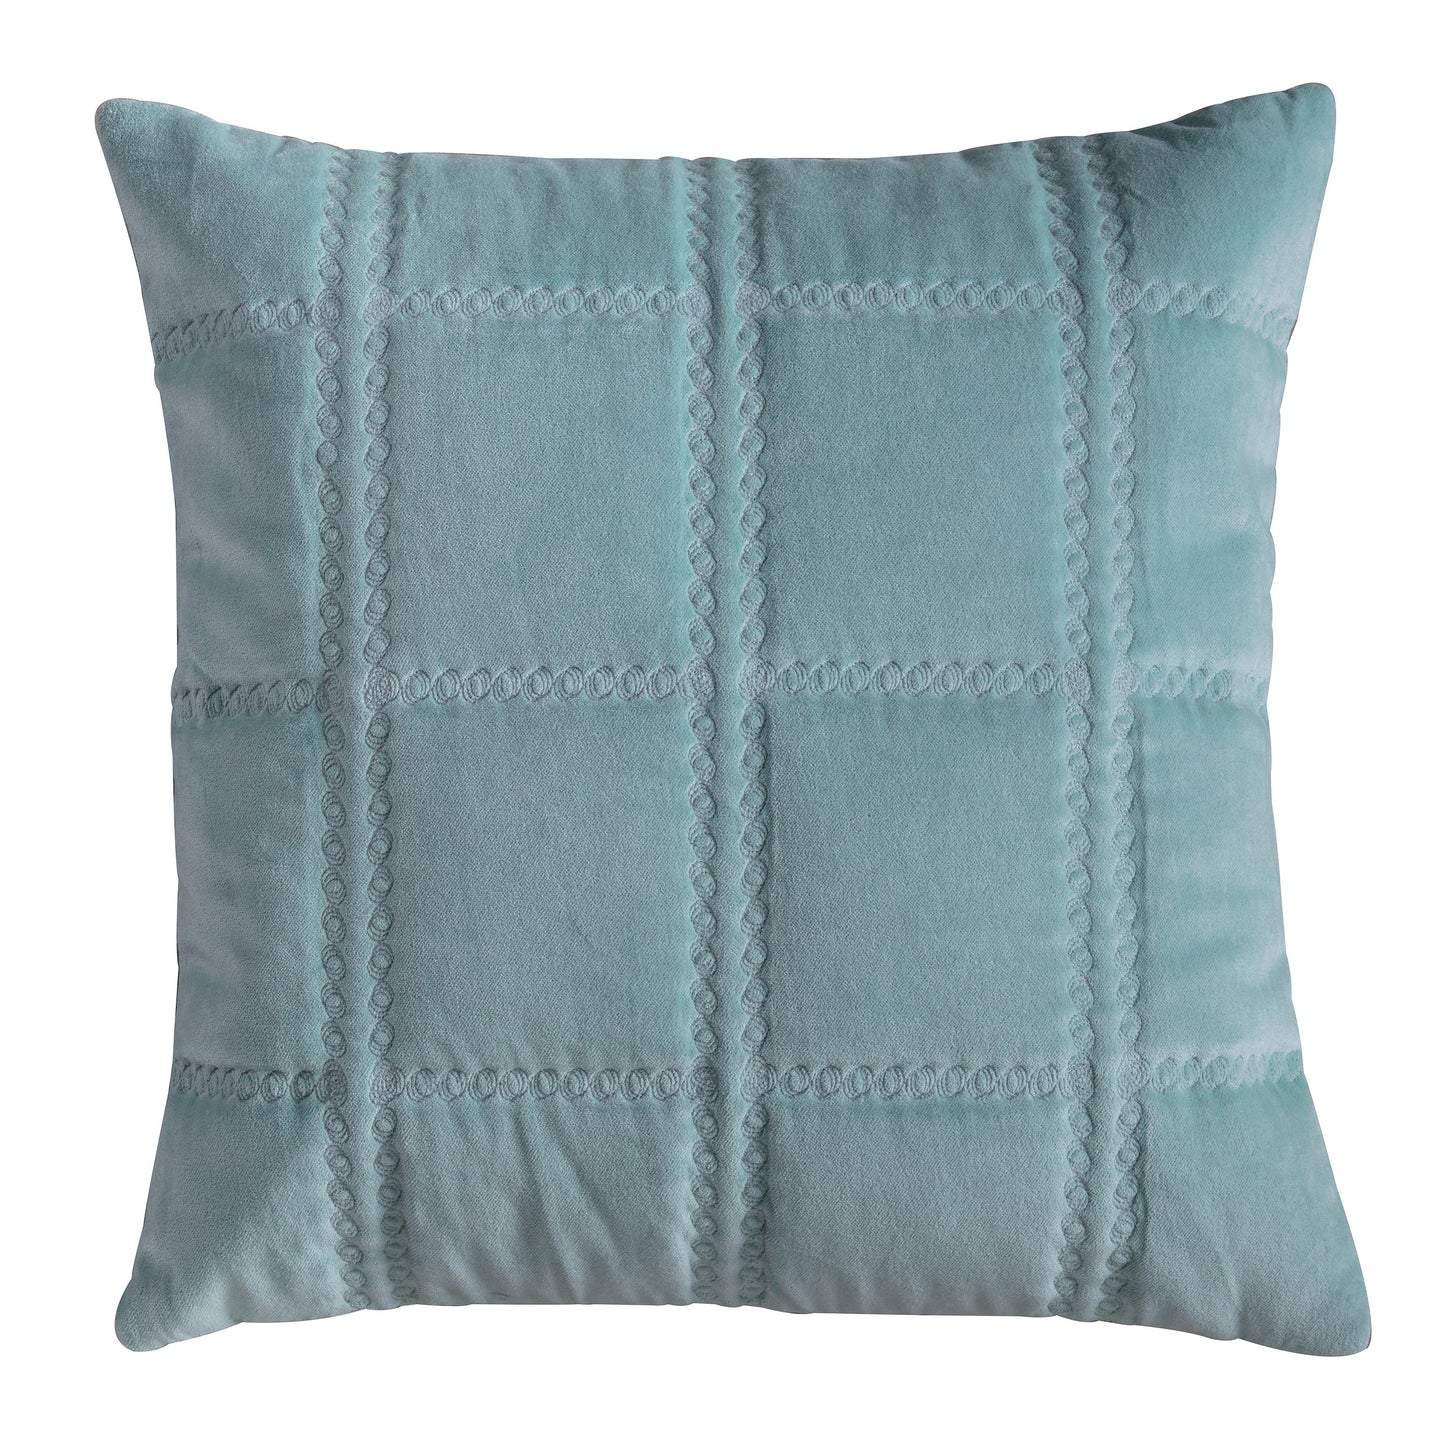 A Quilted Cotton Velvet Cushion with Checkered Pattern for Interior Decor.